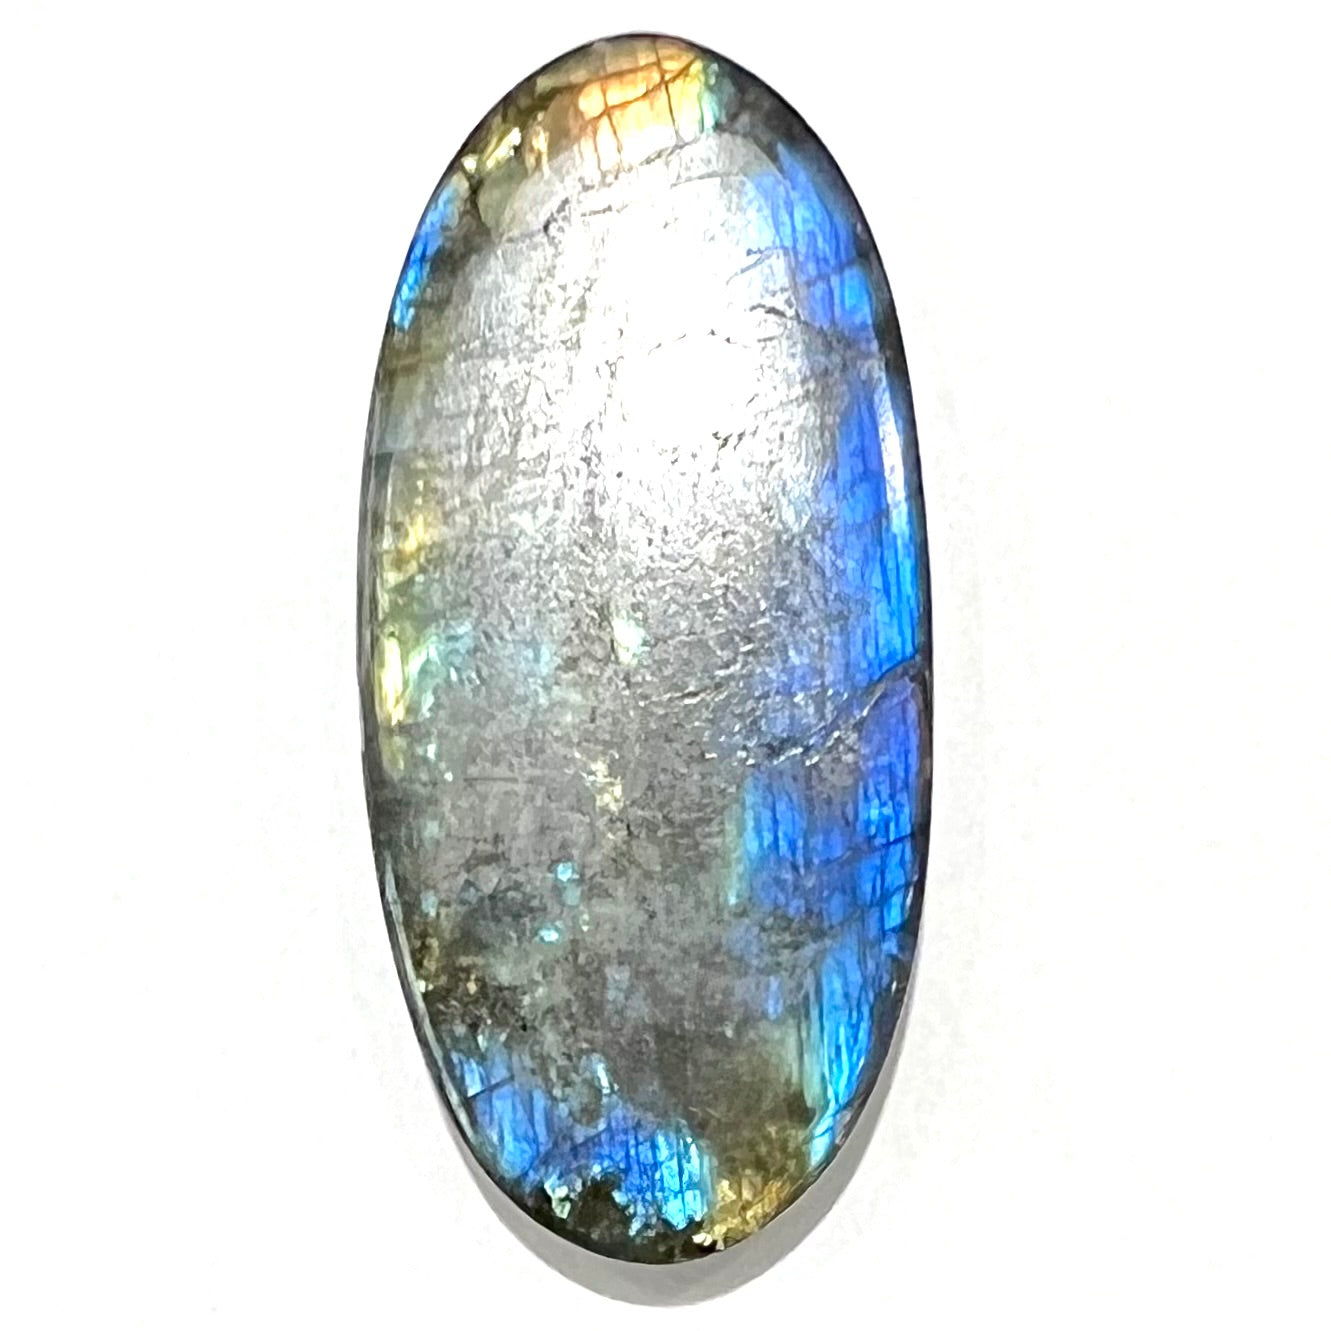 A loose, oval cabochon cut labradorite stone.  The stone is green with bright blue and yellow flashes.